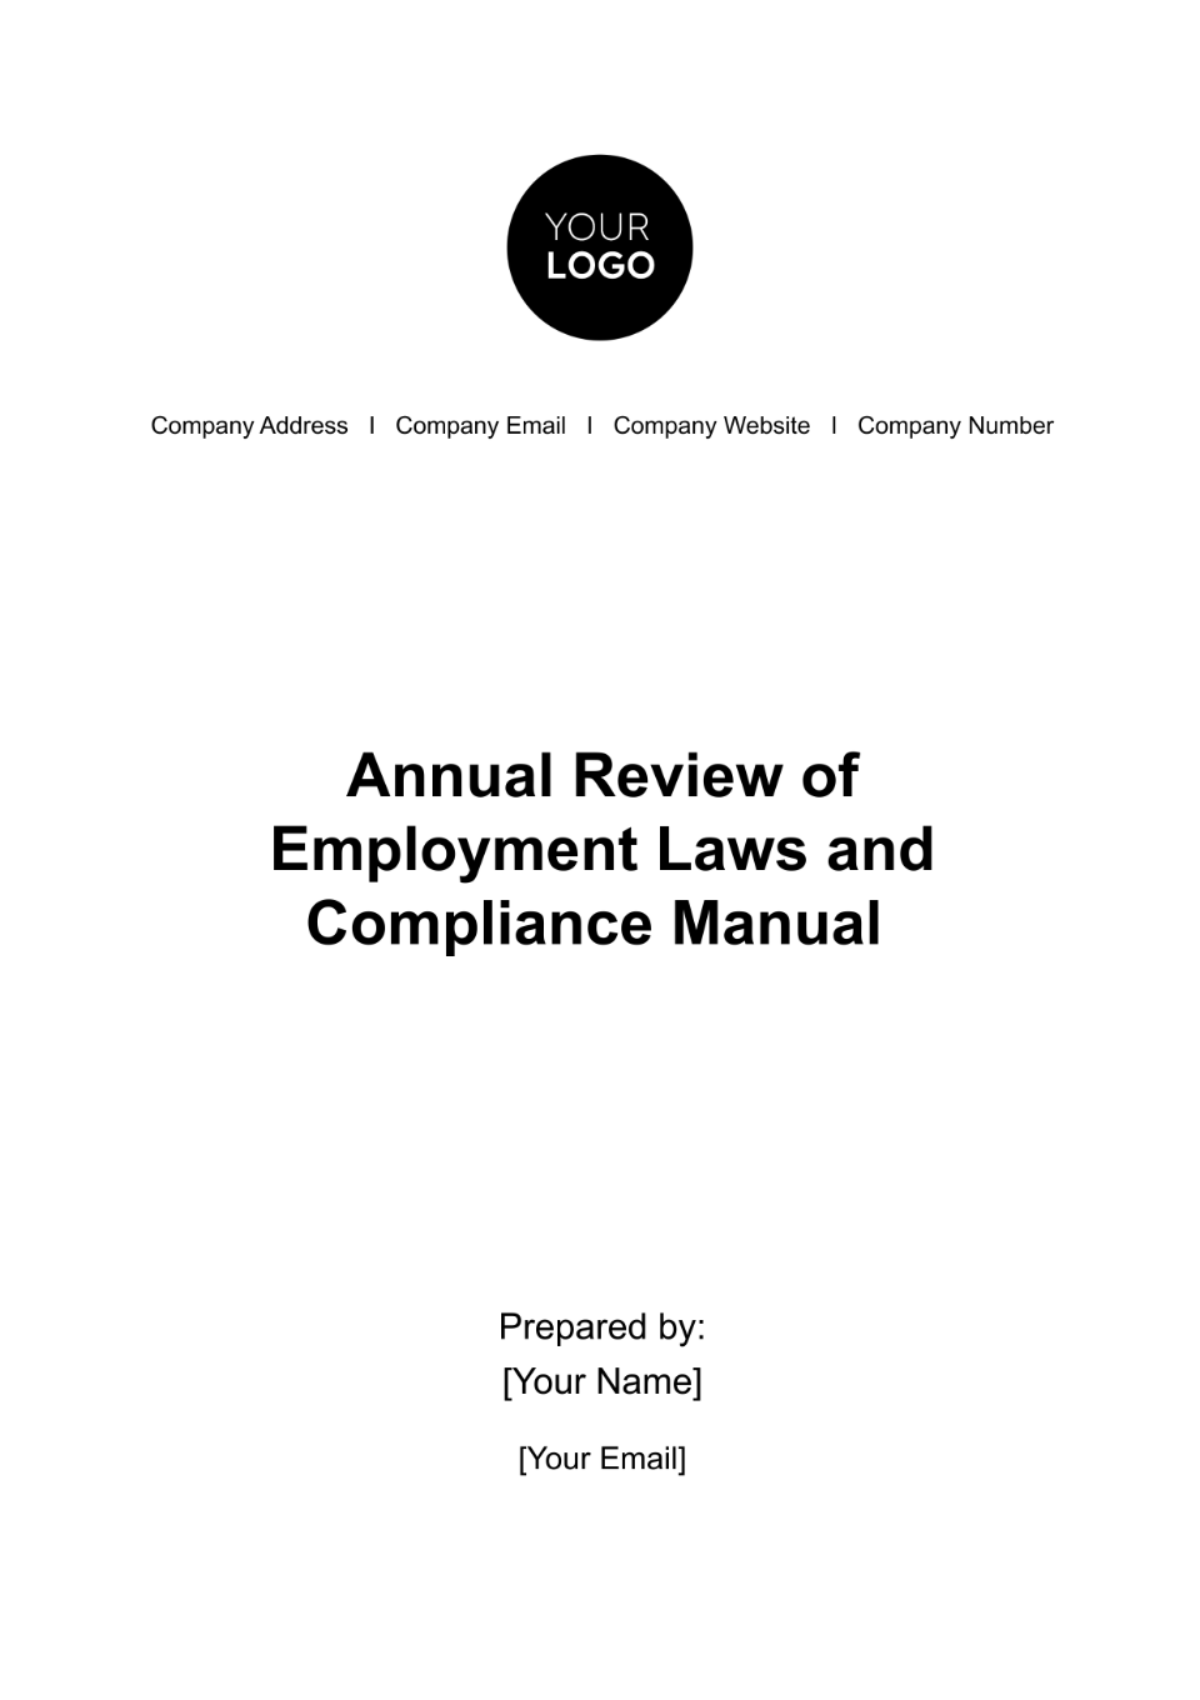 Free Annual Review of Employment Laws and Compliance Manual HR Template